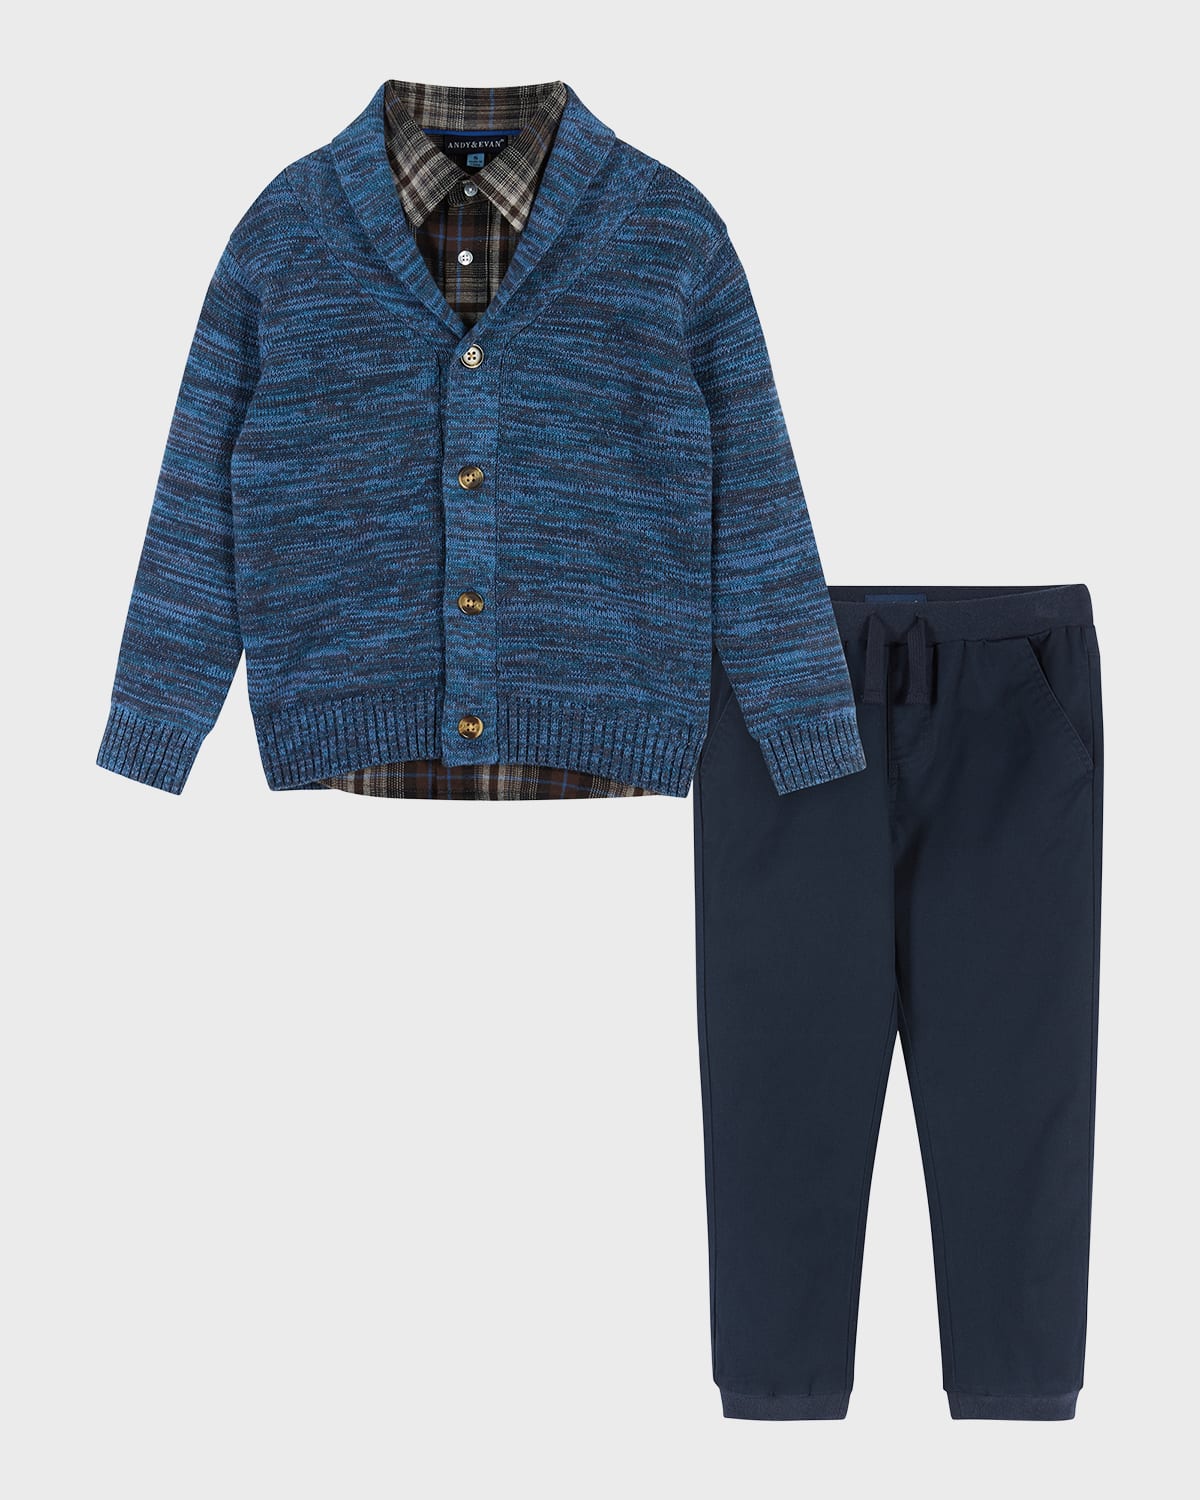 ANDY & EVAN BOY'S MULTICOLORED MARLED TOGGLE CARDIGAN SET